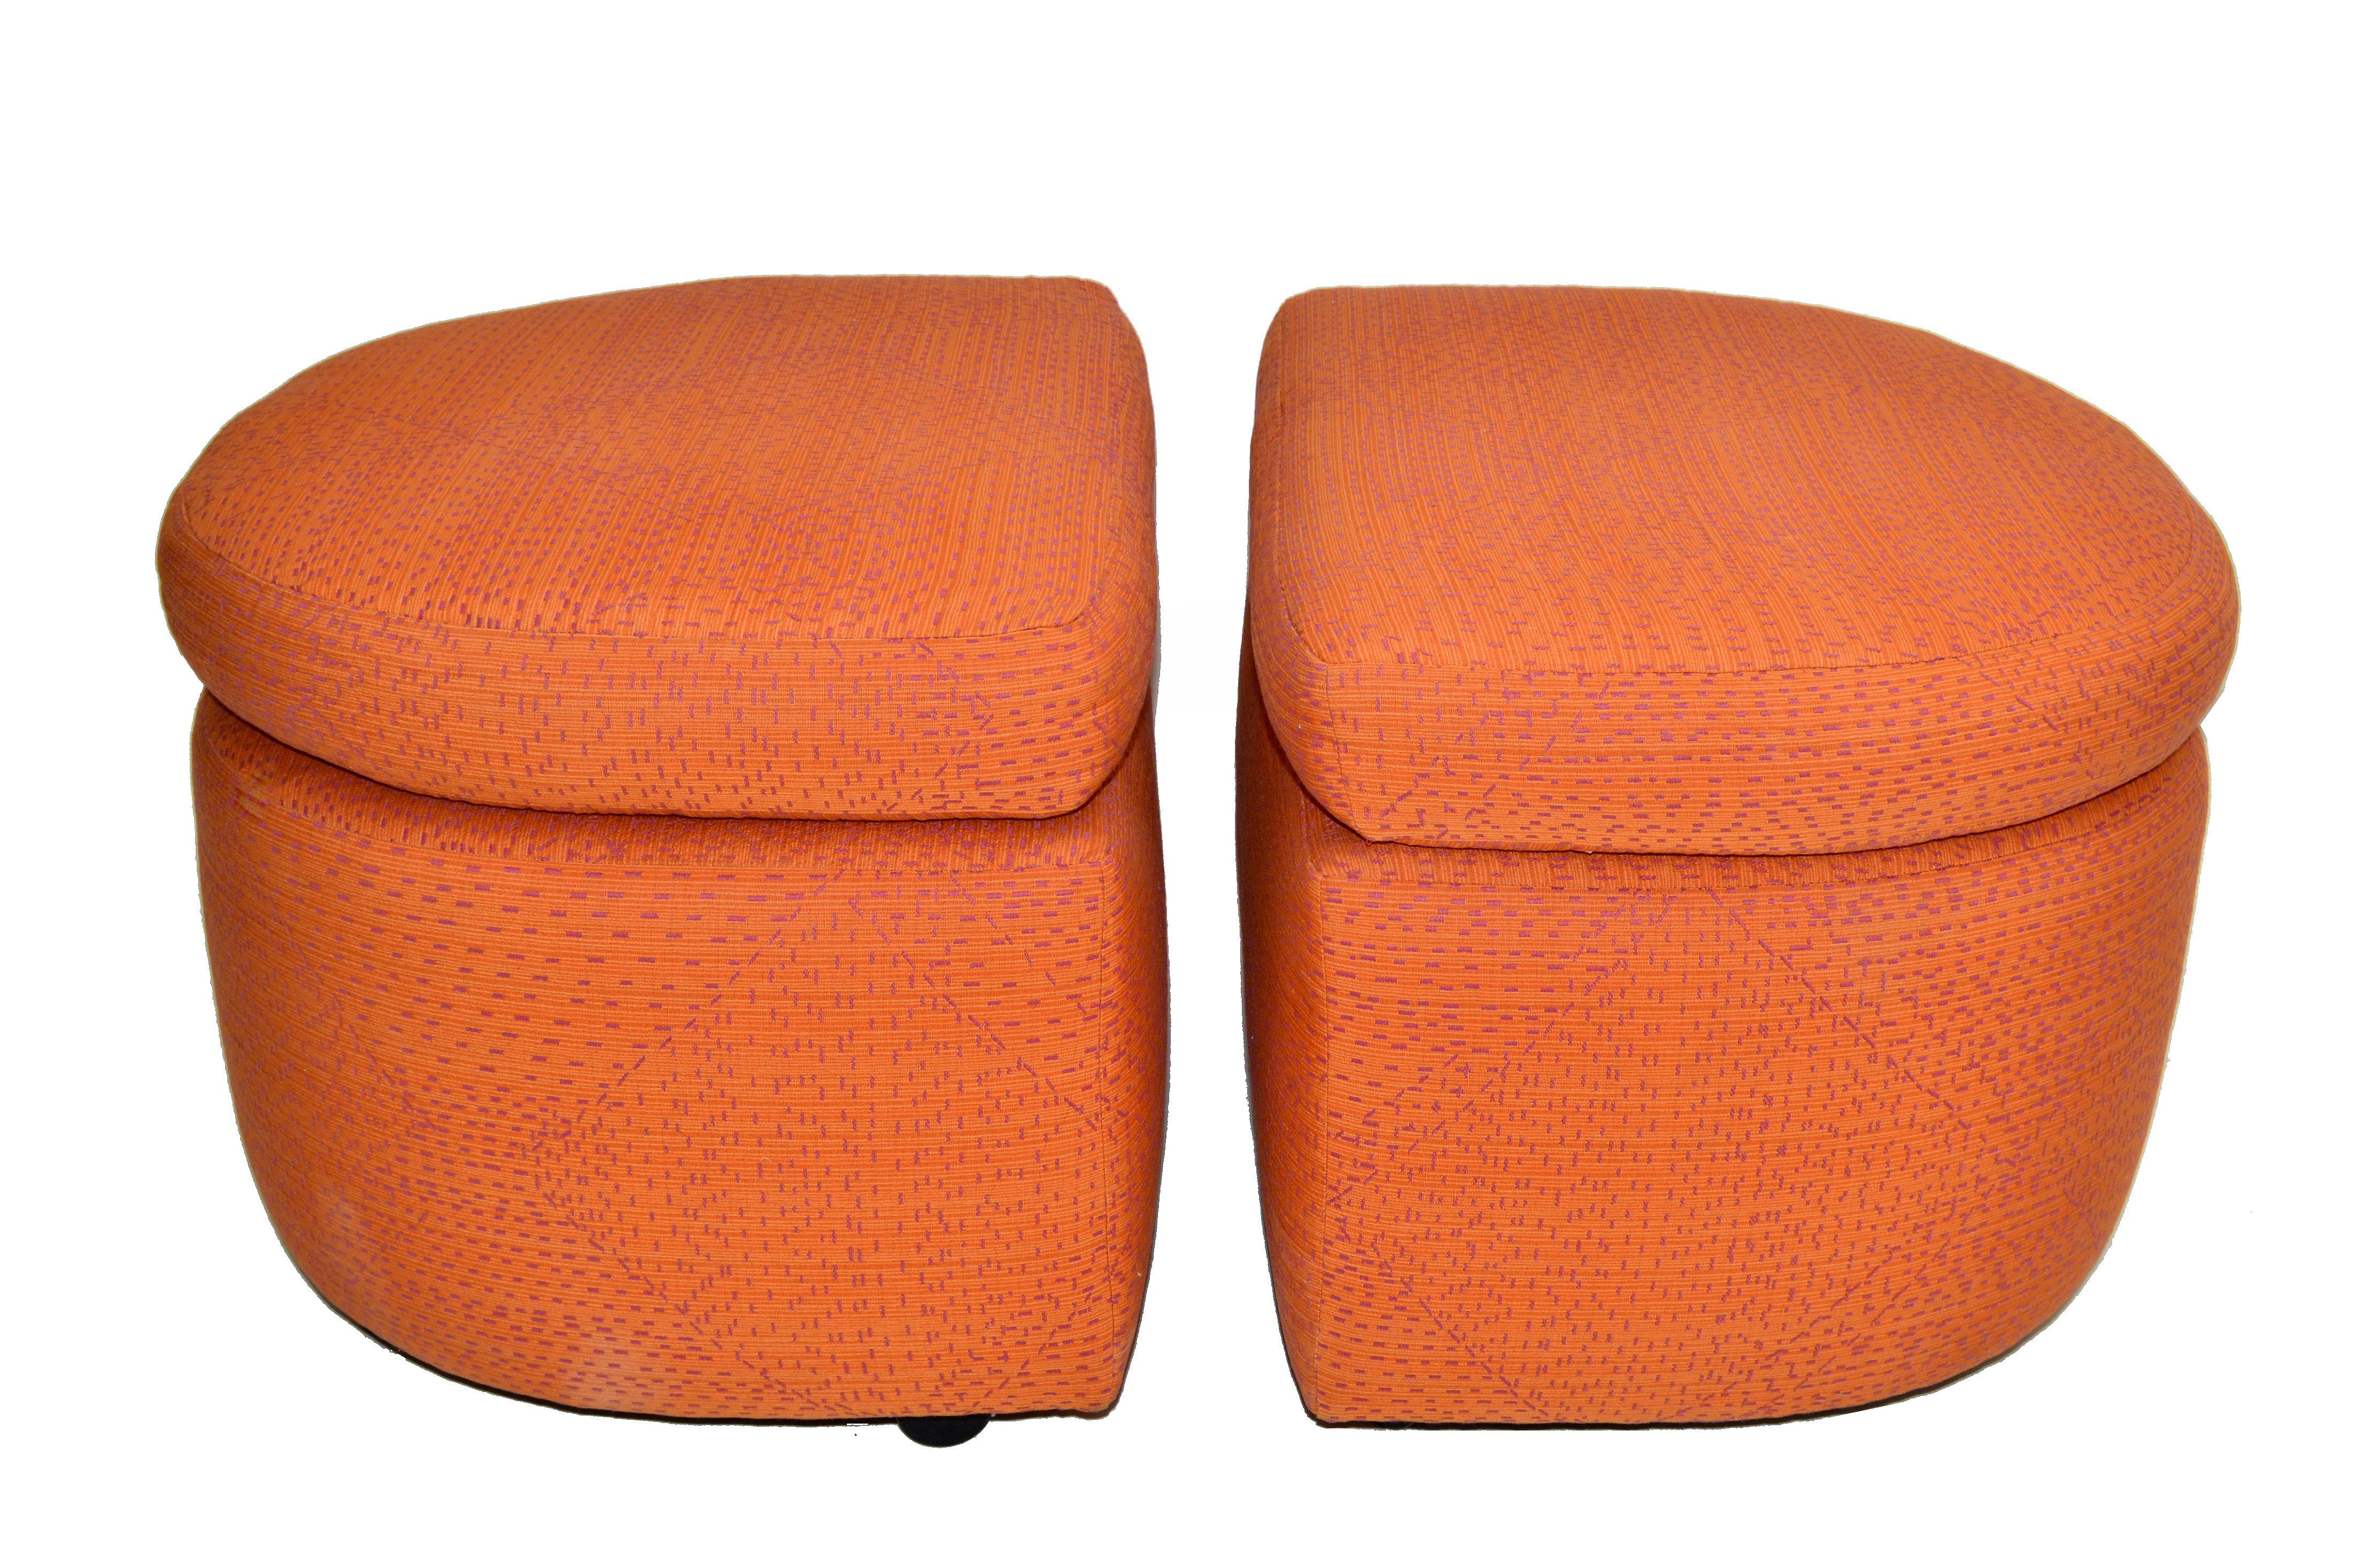 Hand-Crafted Mid-Century Modern Orange Cotton Upholstery Ottoman on Casters & Cushions - Pair For Sale